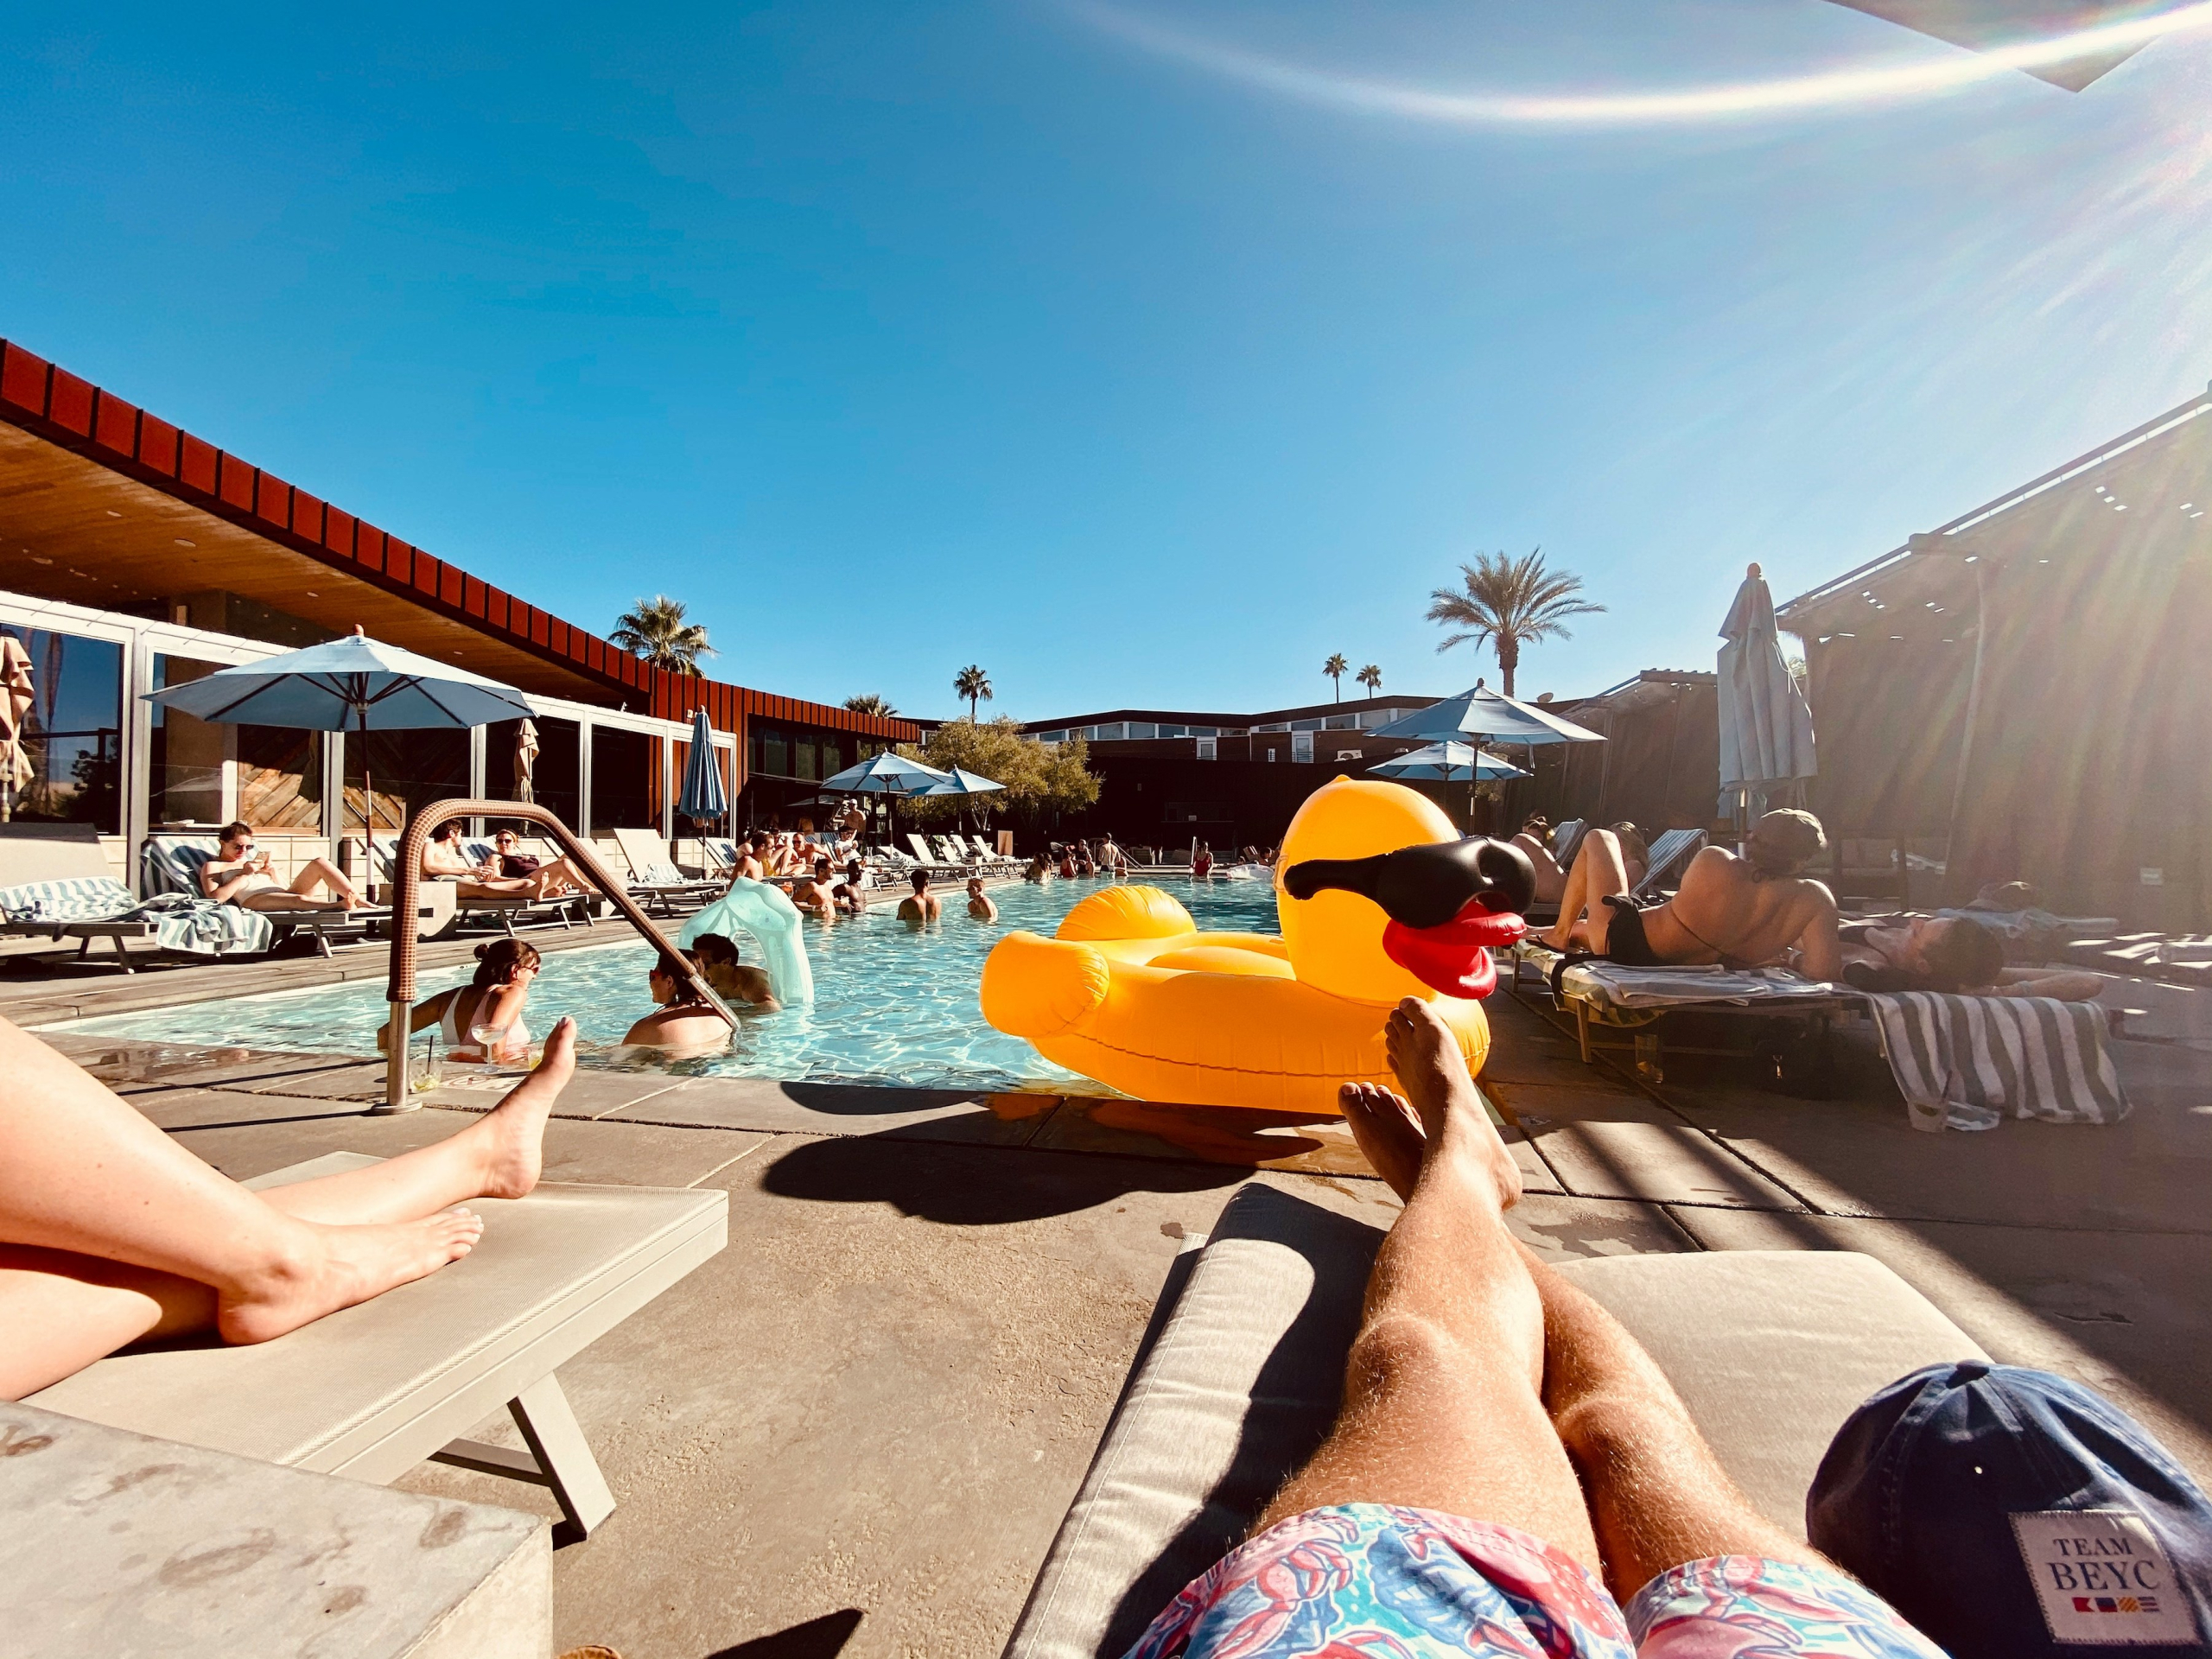 A man relaxes on a chaise lounge by the pool in Palm Springs, California, with a rubber duck float in the water